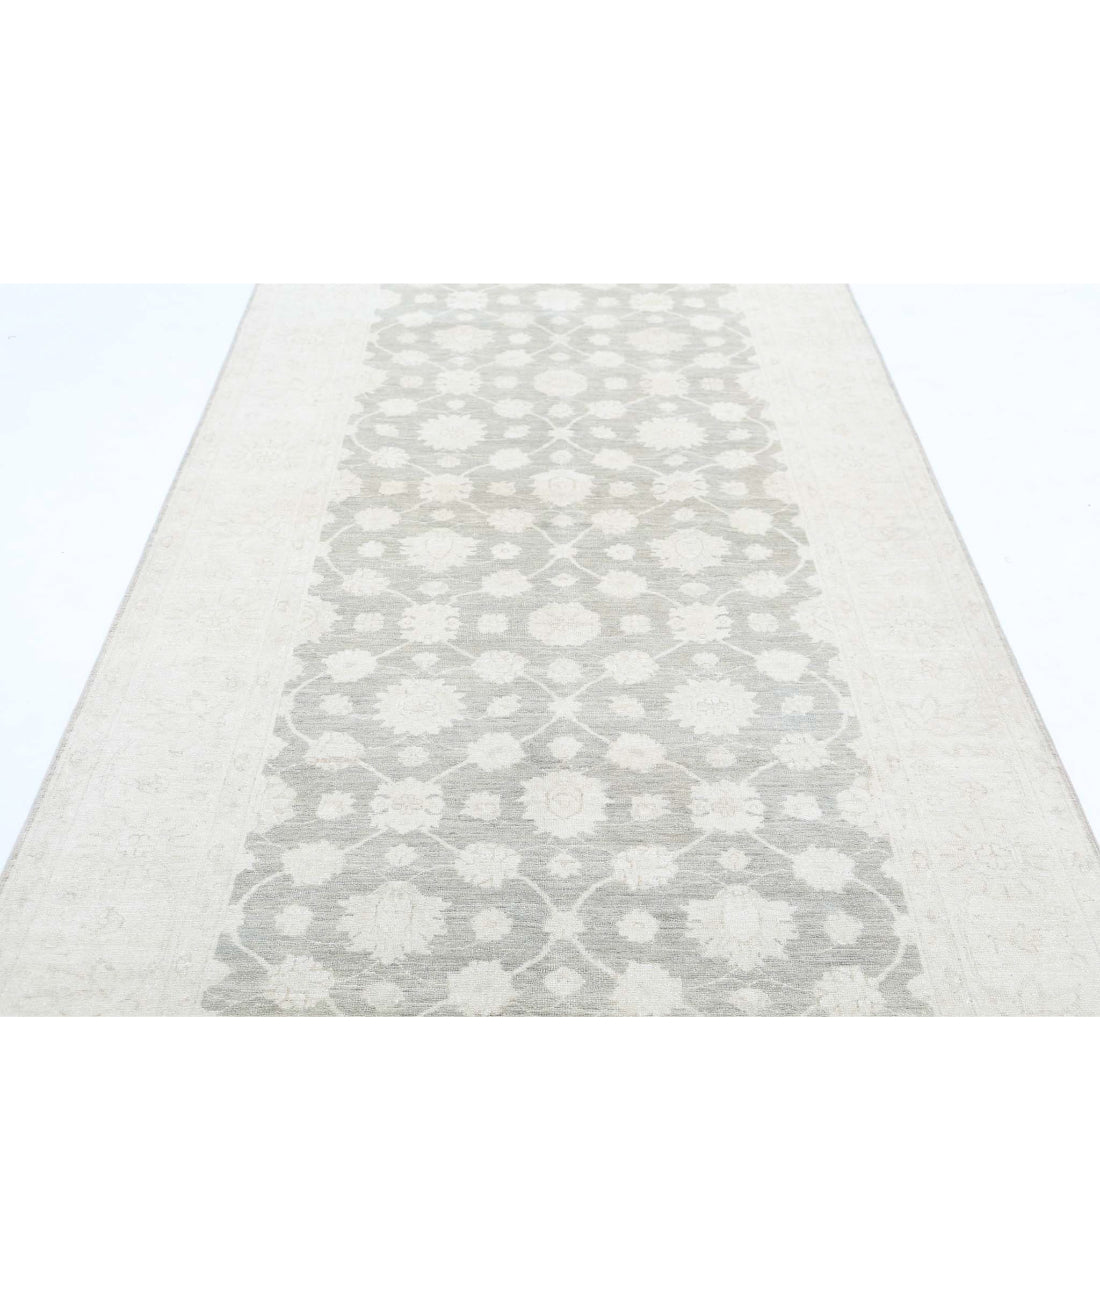 Serenity 4'7'' X 14'2'' Hand-Knotted Wool Rug 4'7'' x 14'2'' (138 X 425) / Brown / Ivory